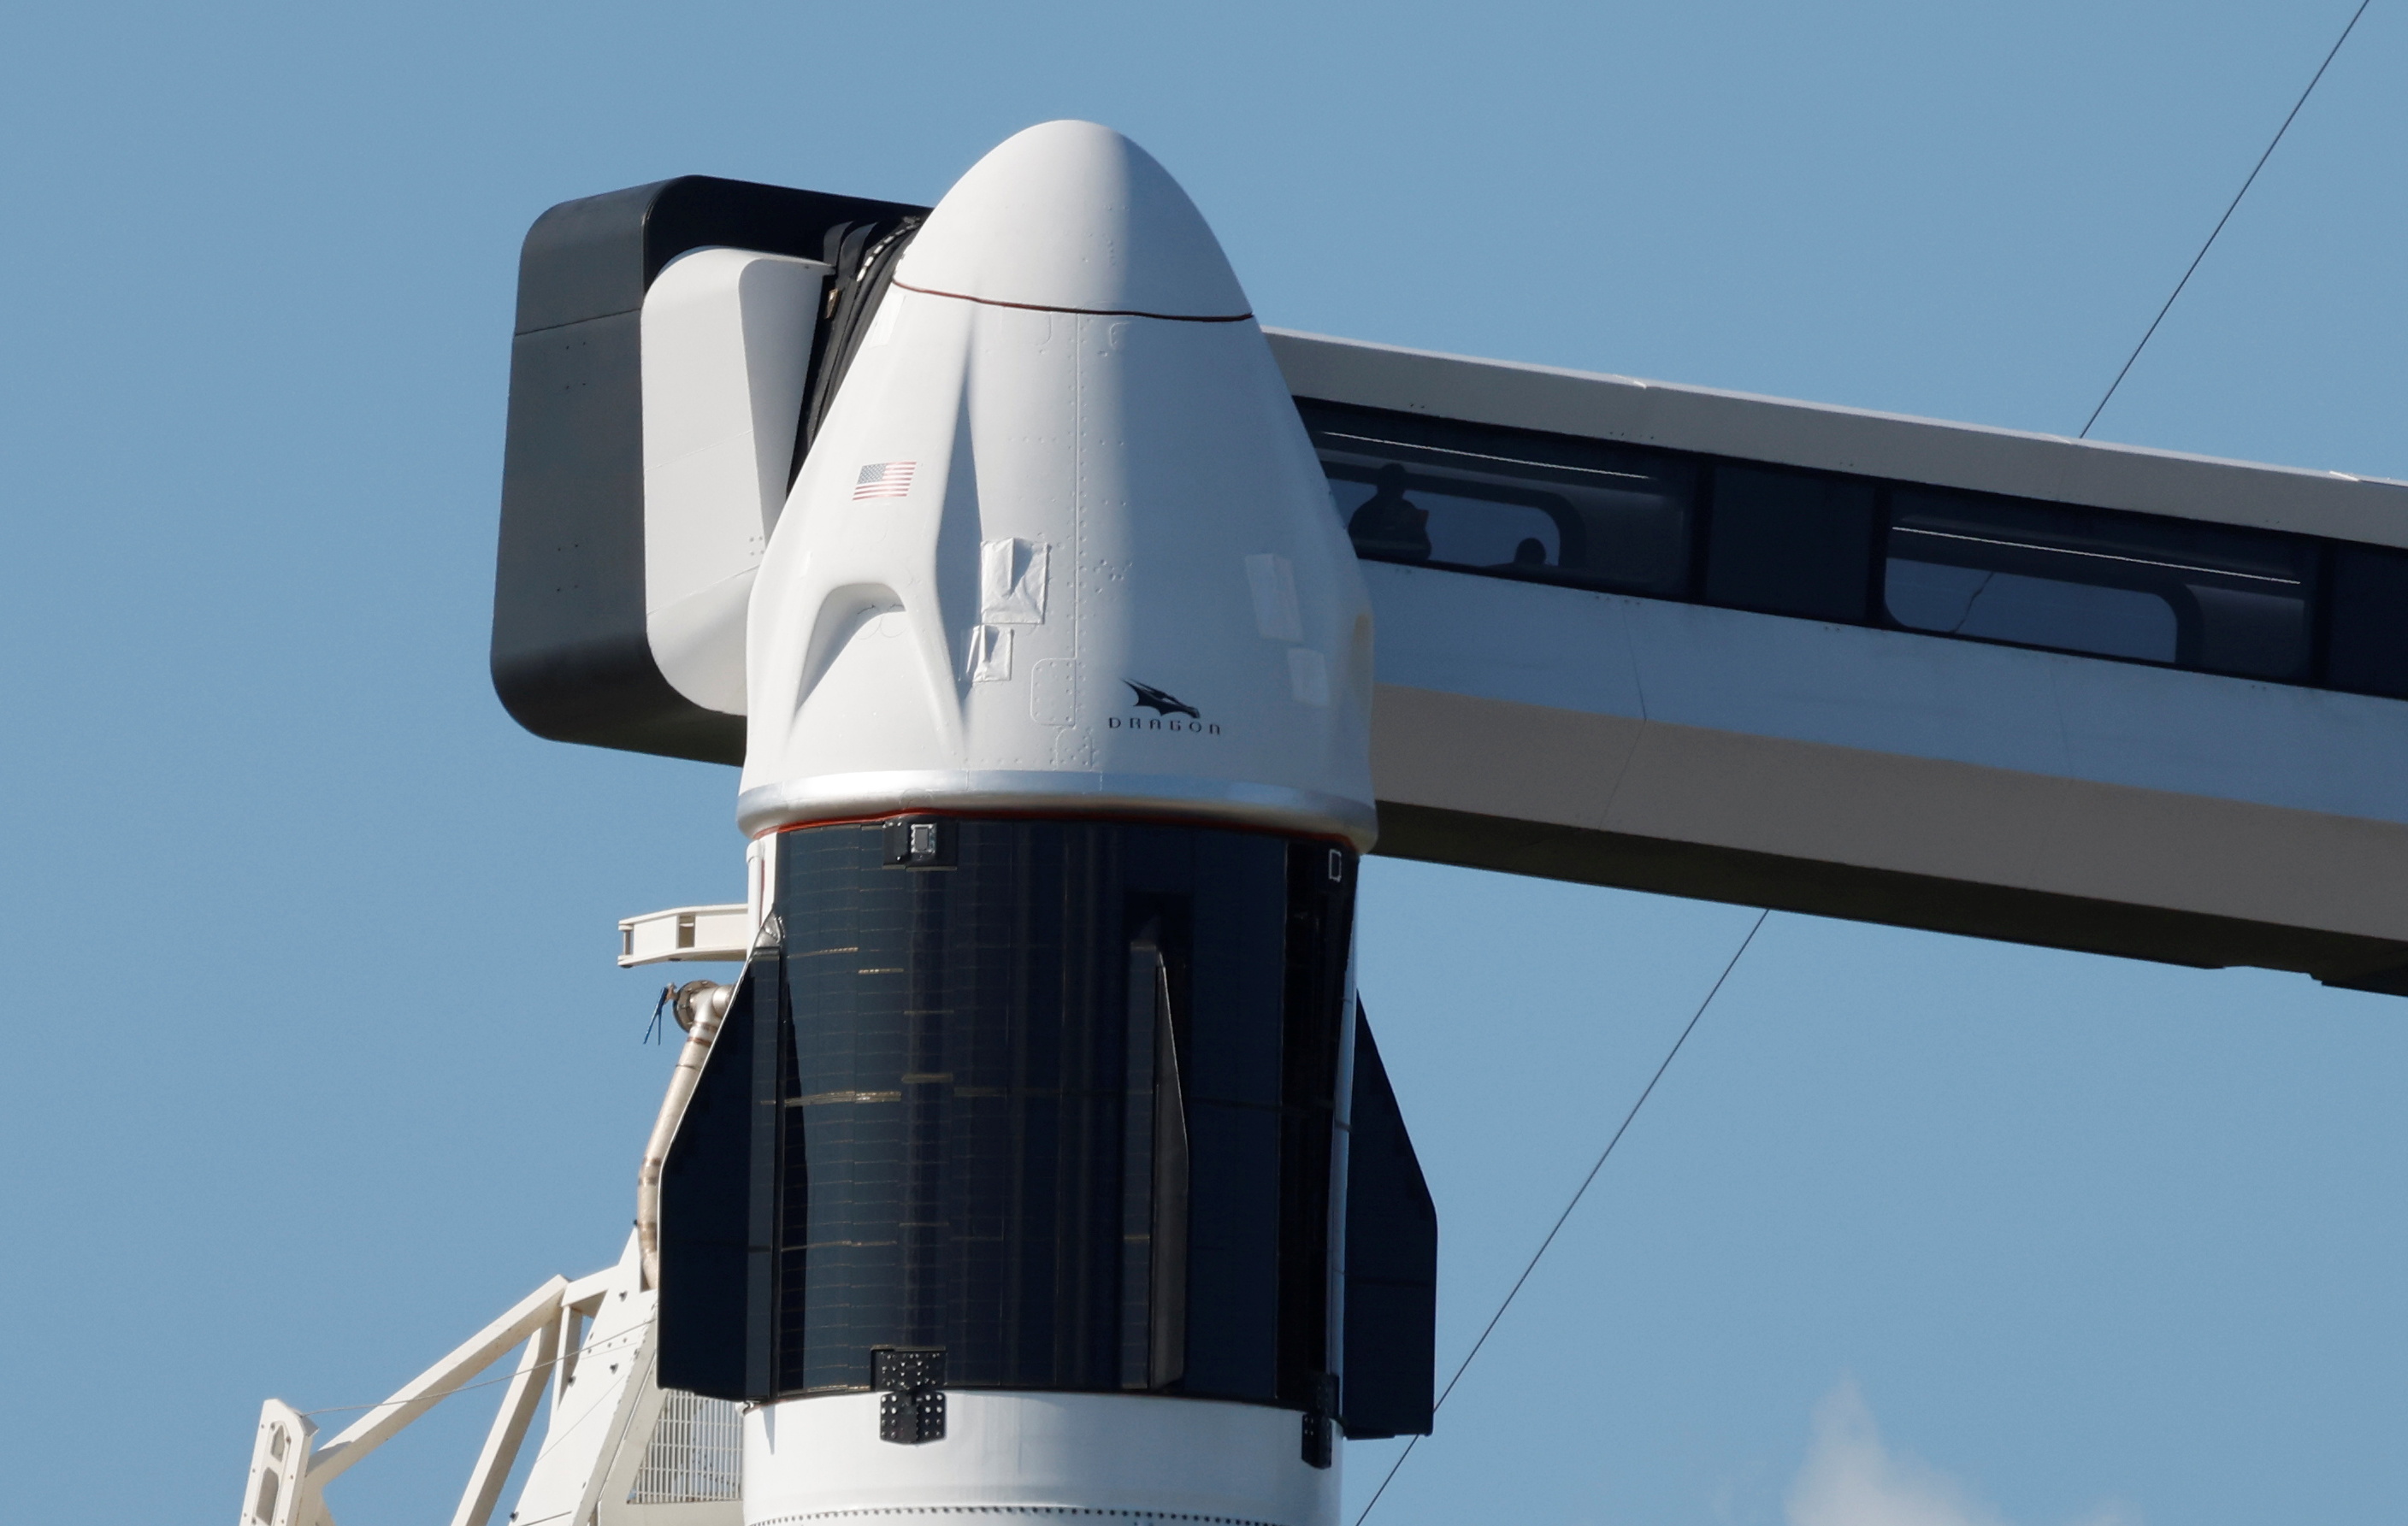 A SpaceX Falcon 9 with the Crew Dragon capsule stands on Pad-39A in preparation for the Inspiration 4 civilian crew mission at the Kennedy Space Center